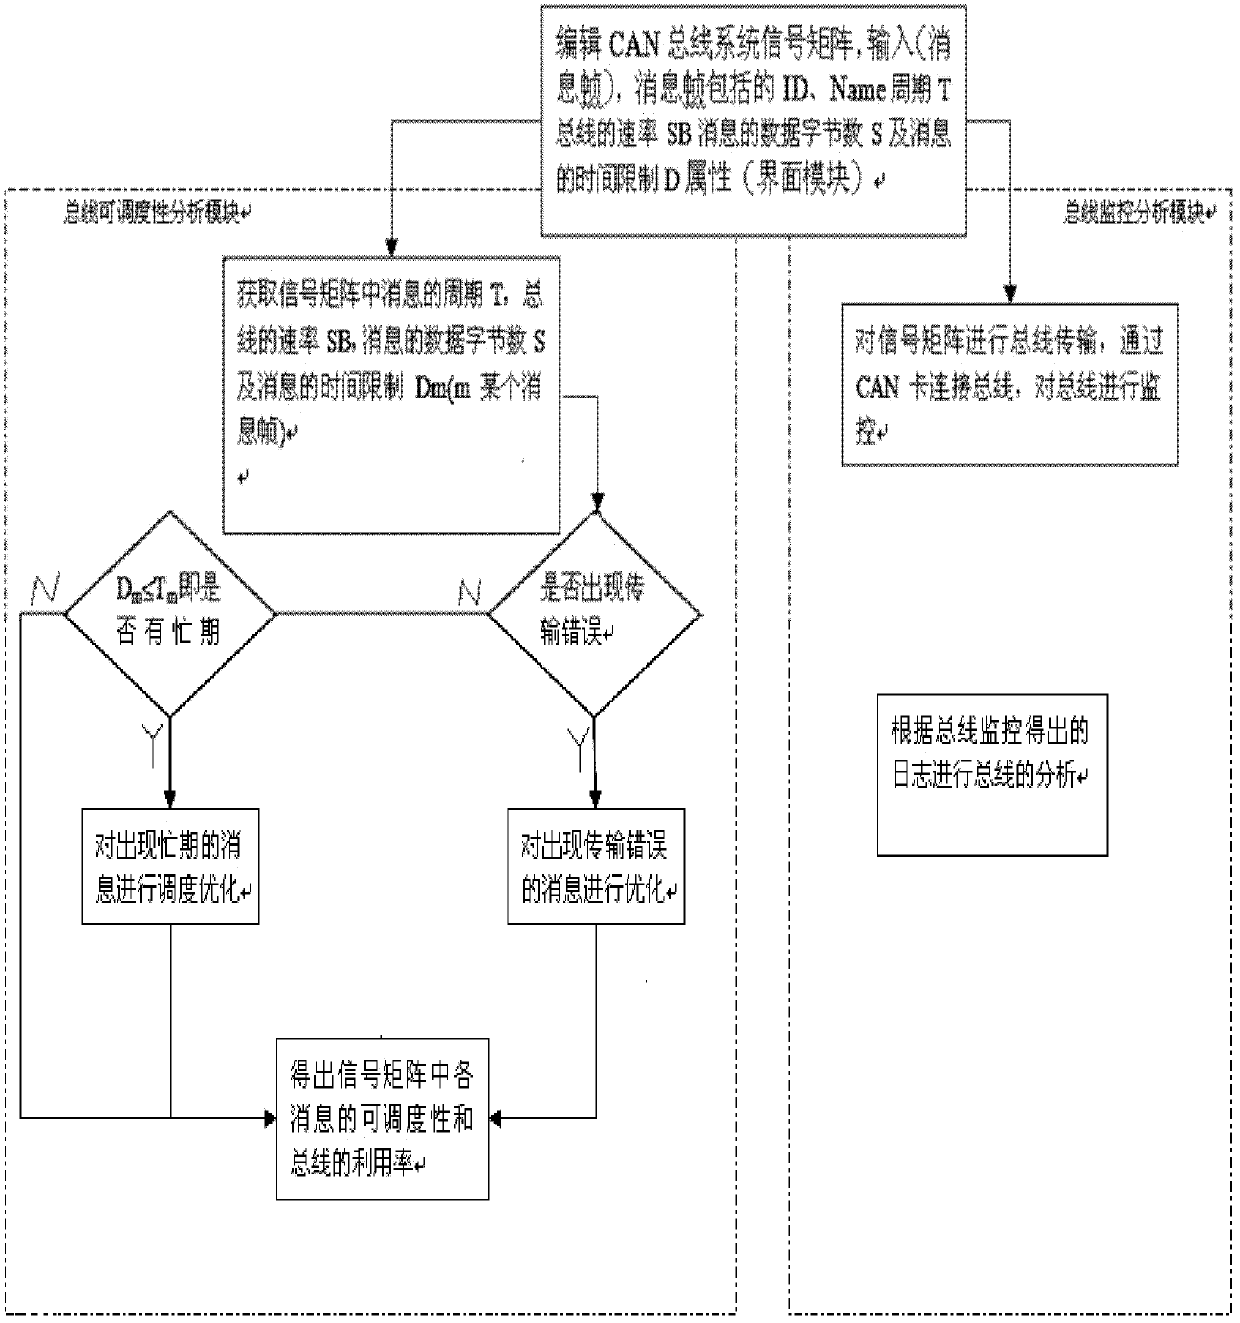 CAN (controller area network) bus scheduling analysis and monitoring system